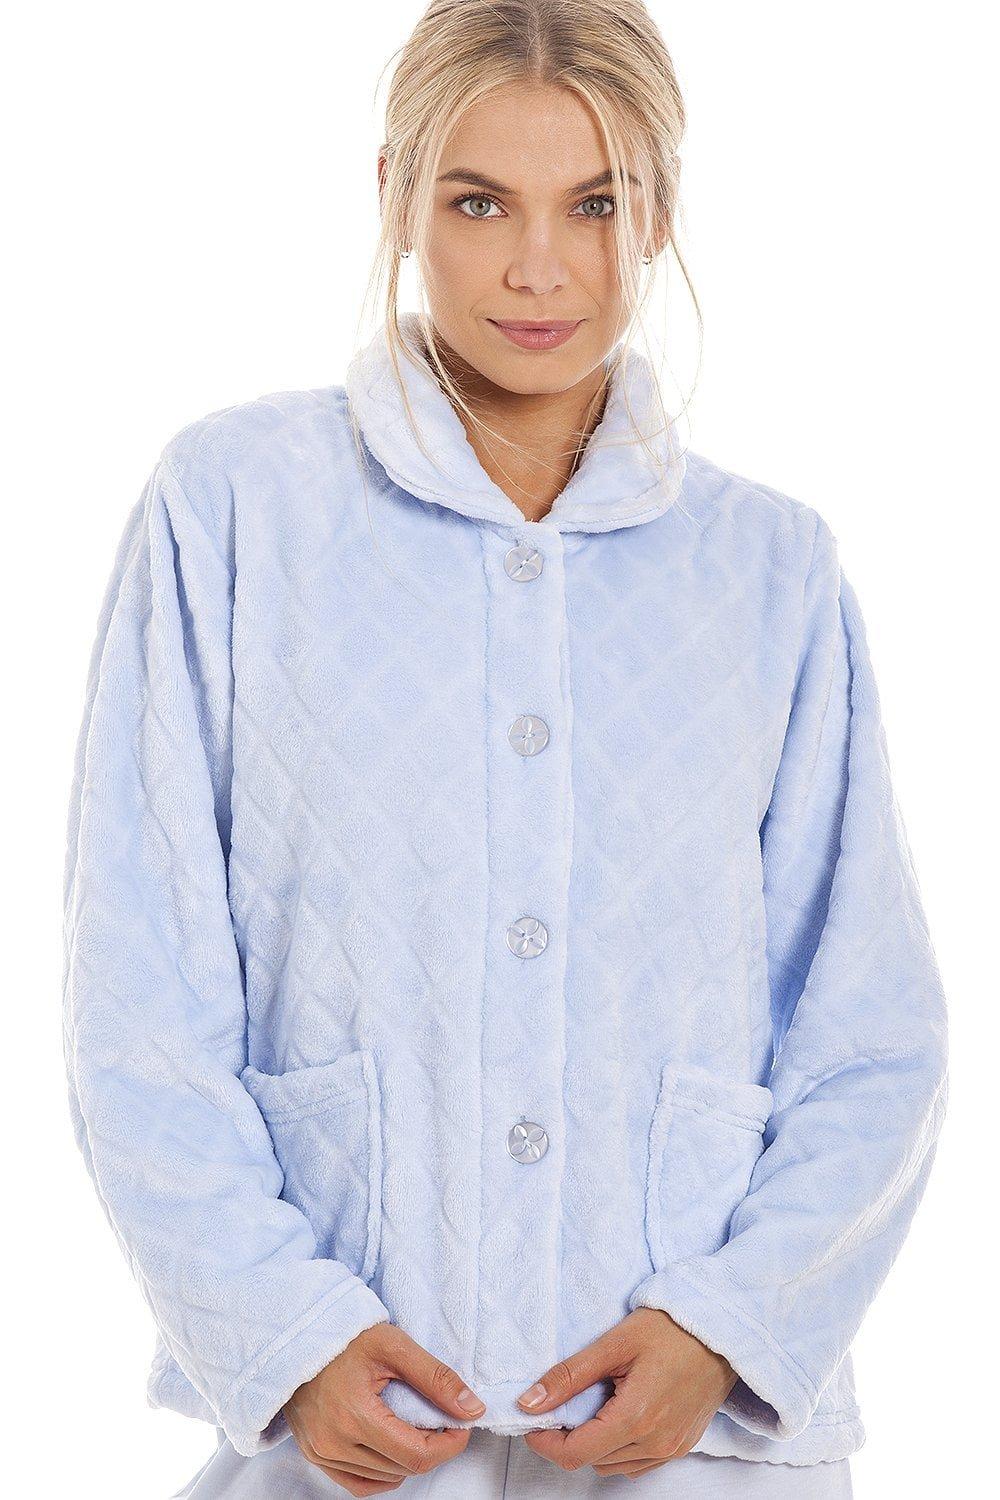 Classic Supersoft Diamond Print Button Up Bed Jacket